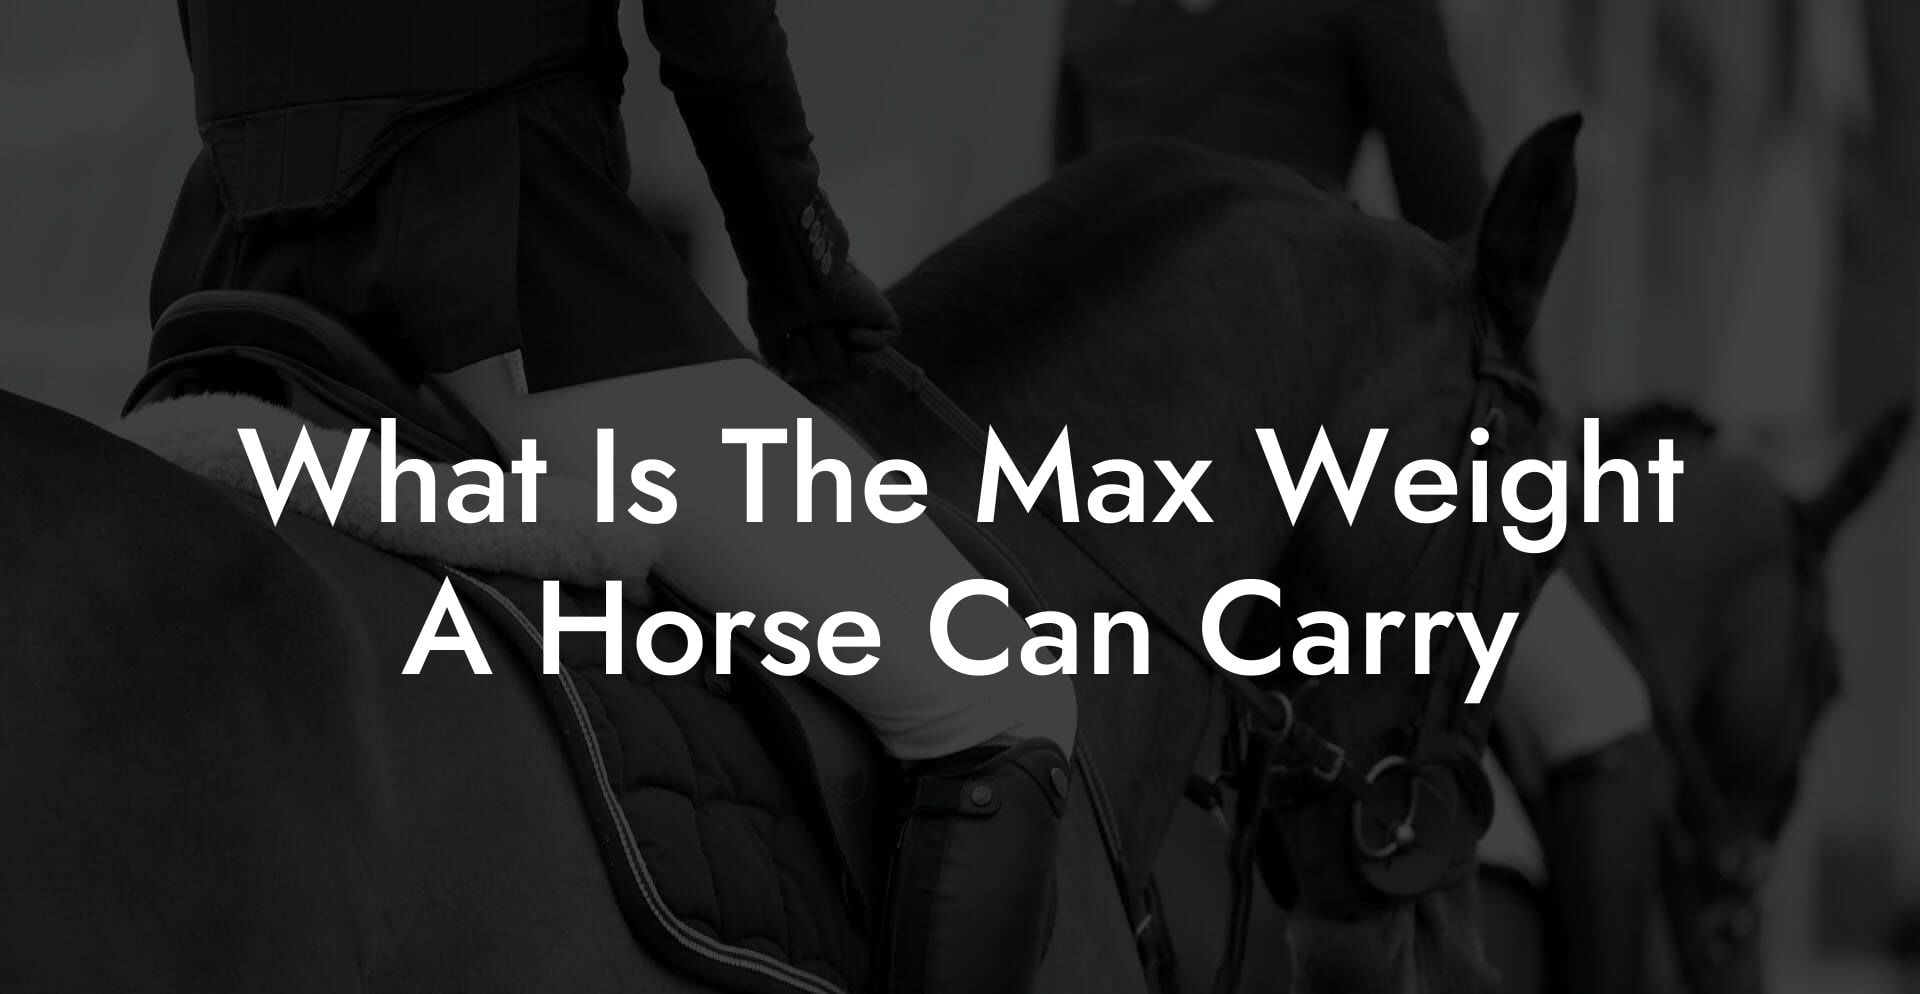 What Is The Max Weight A Horse Can Carry